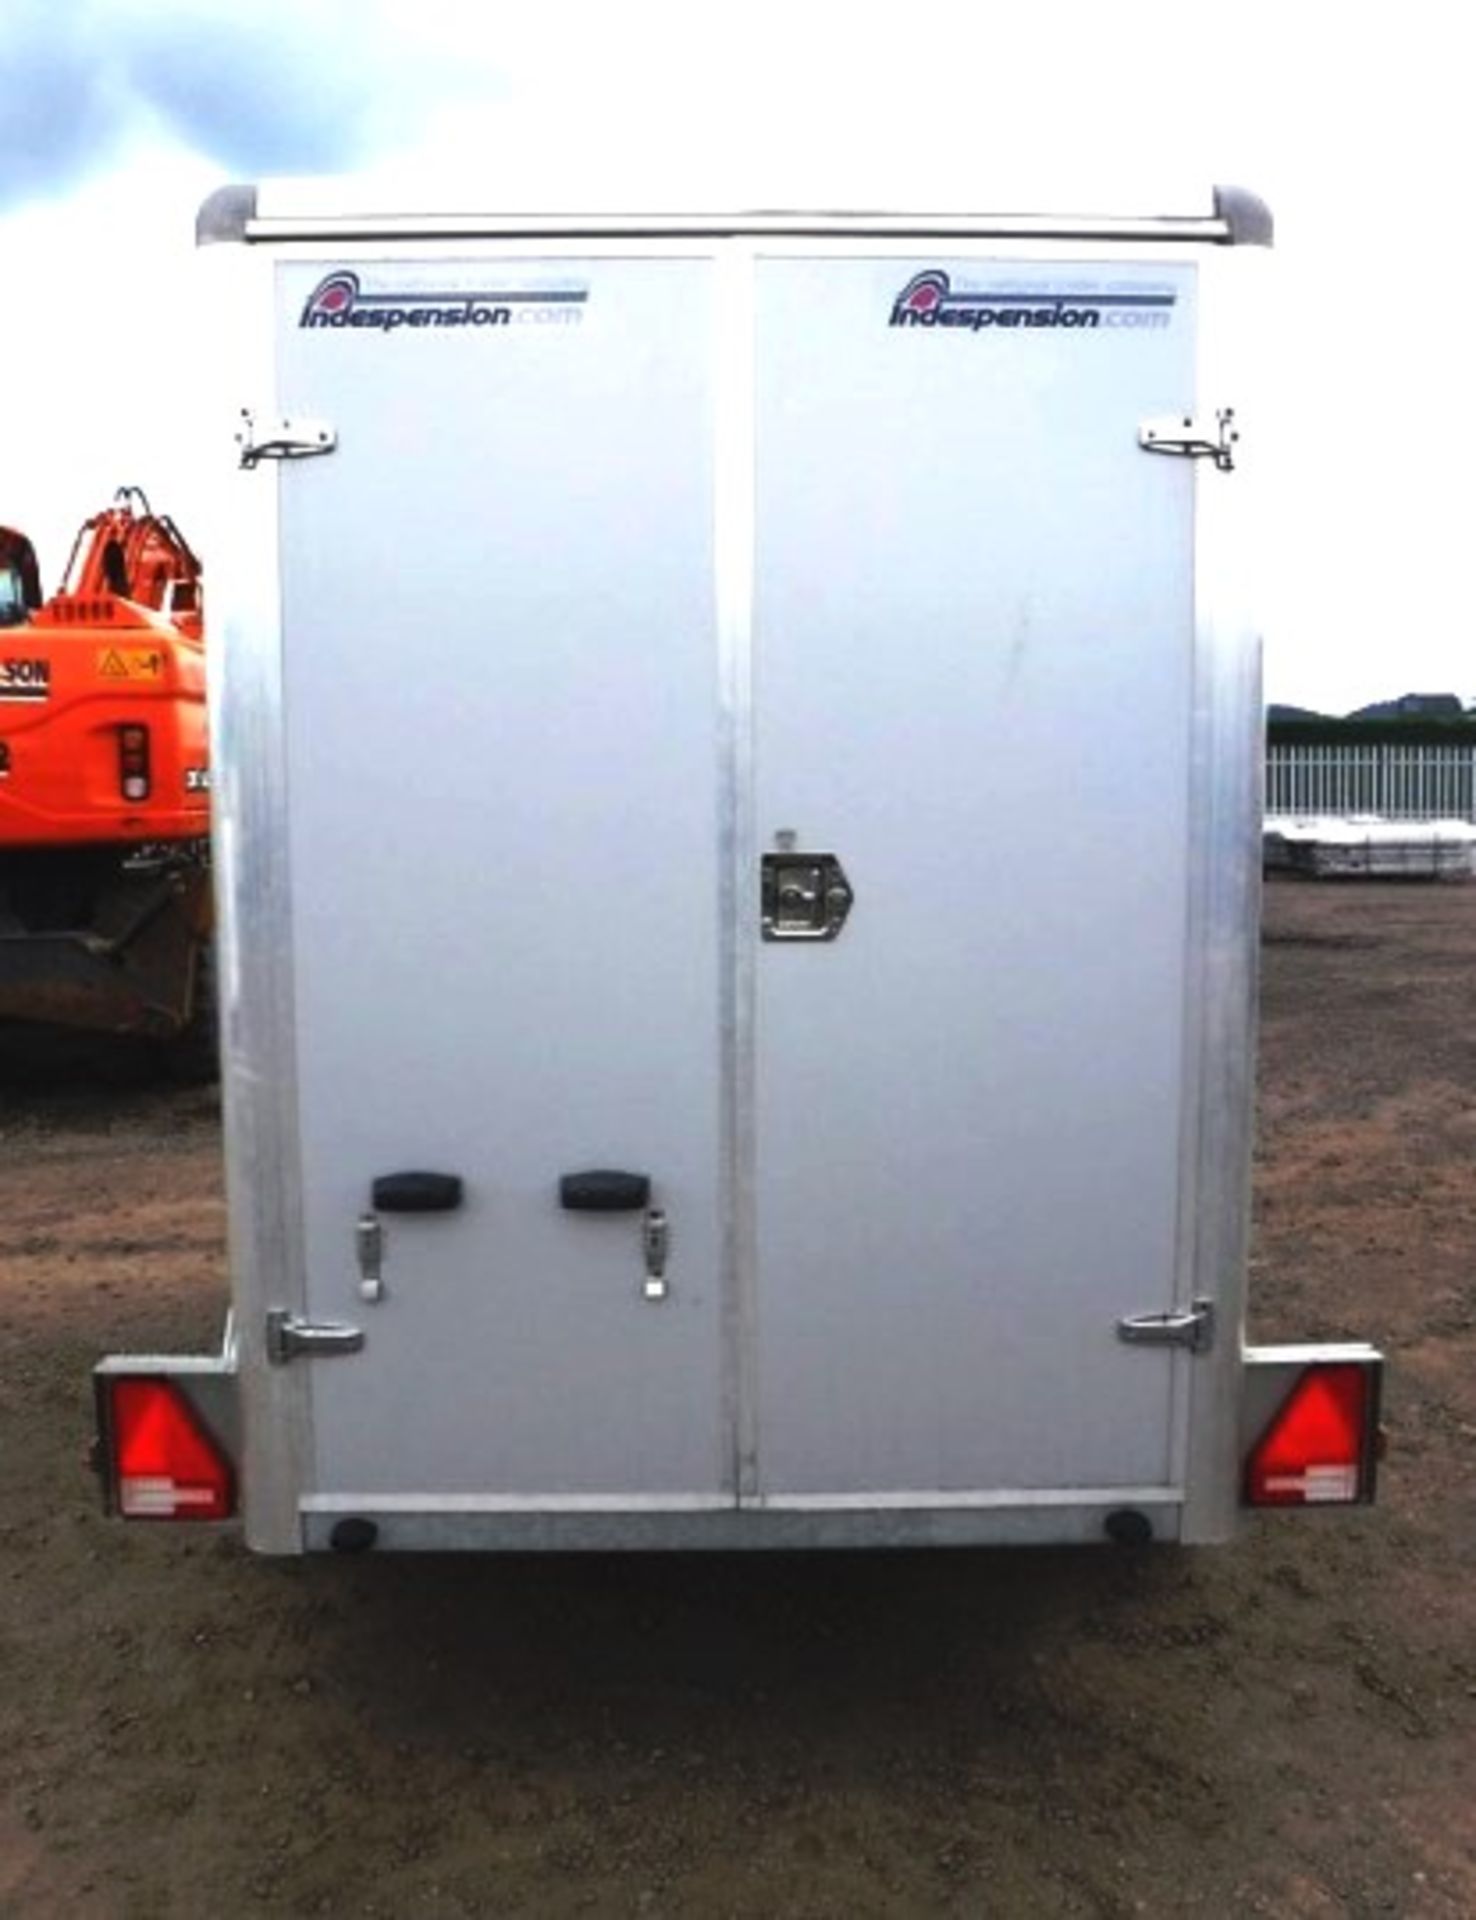 INDESPENSION BOX TRAILER WITH 2 OPENING BACK DOORS & 1 SIDE DOOR, 10FT X 5FT (APPROX) S/N213526 ASSE - Image 4 of 12